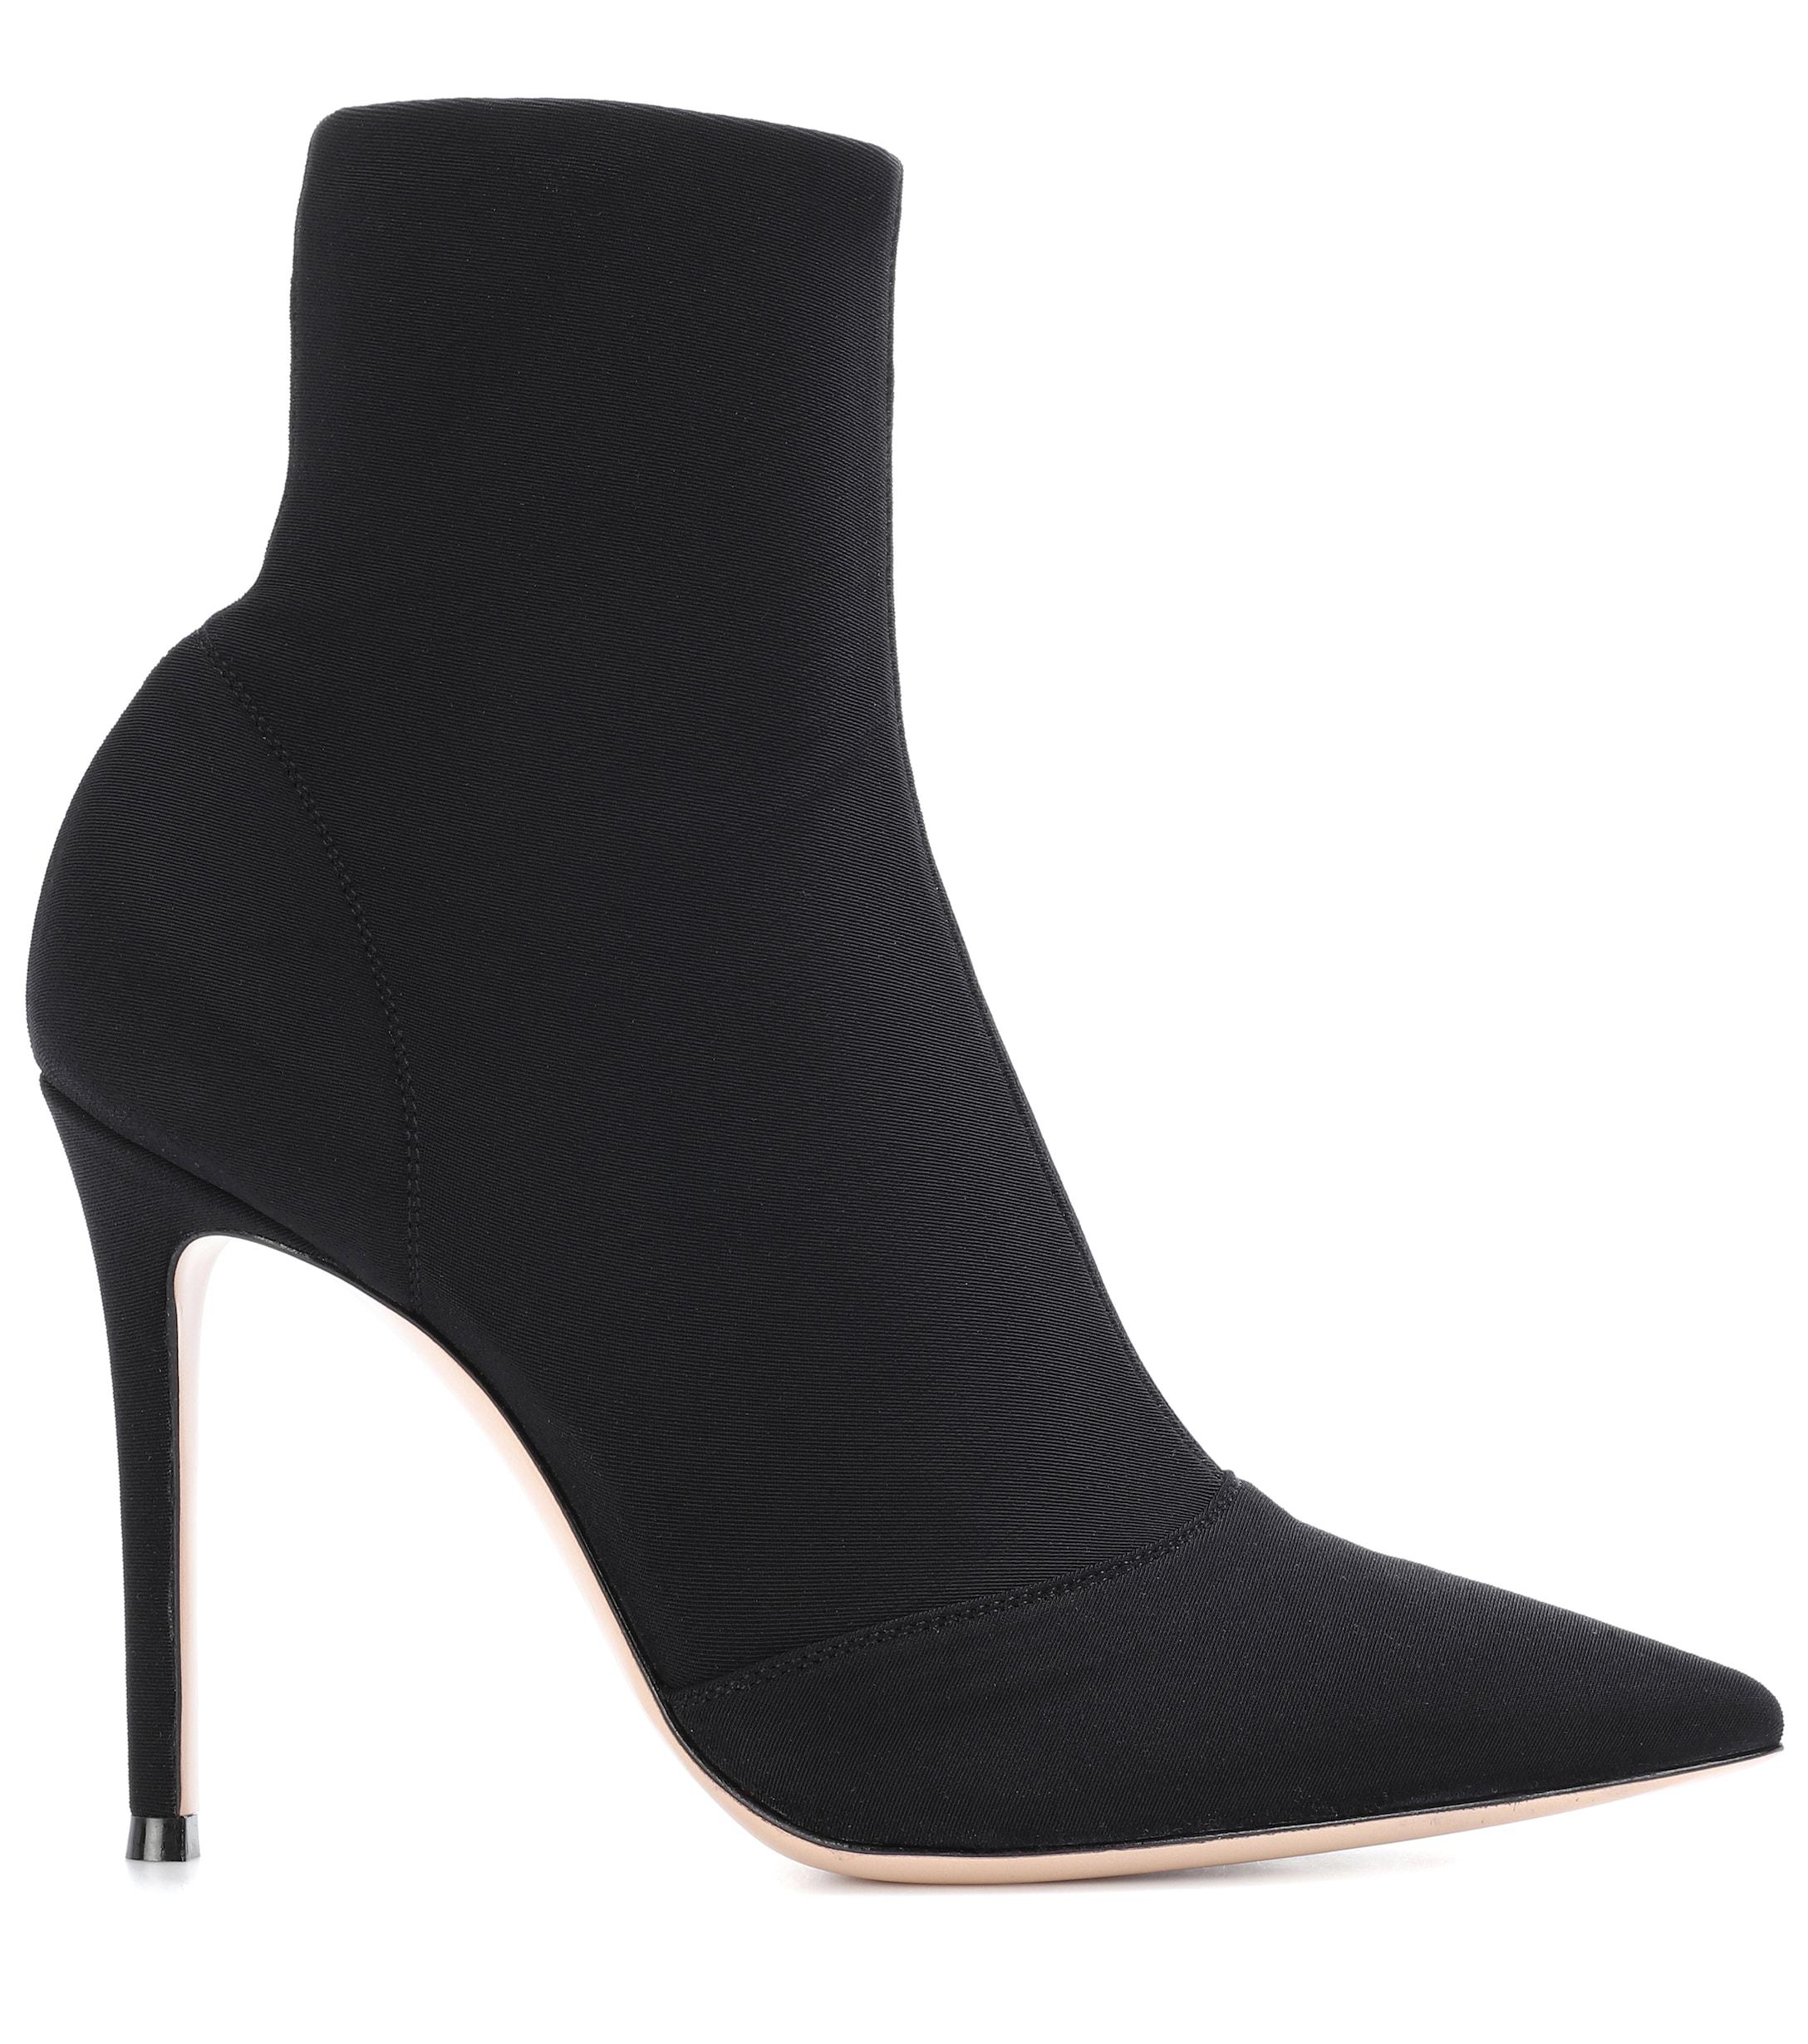 Gianvito Rossi Ankle Boots Black Elite 85 | Lyst